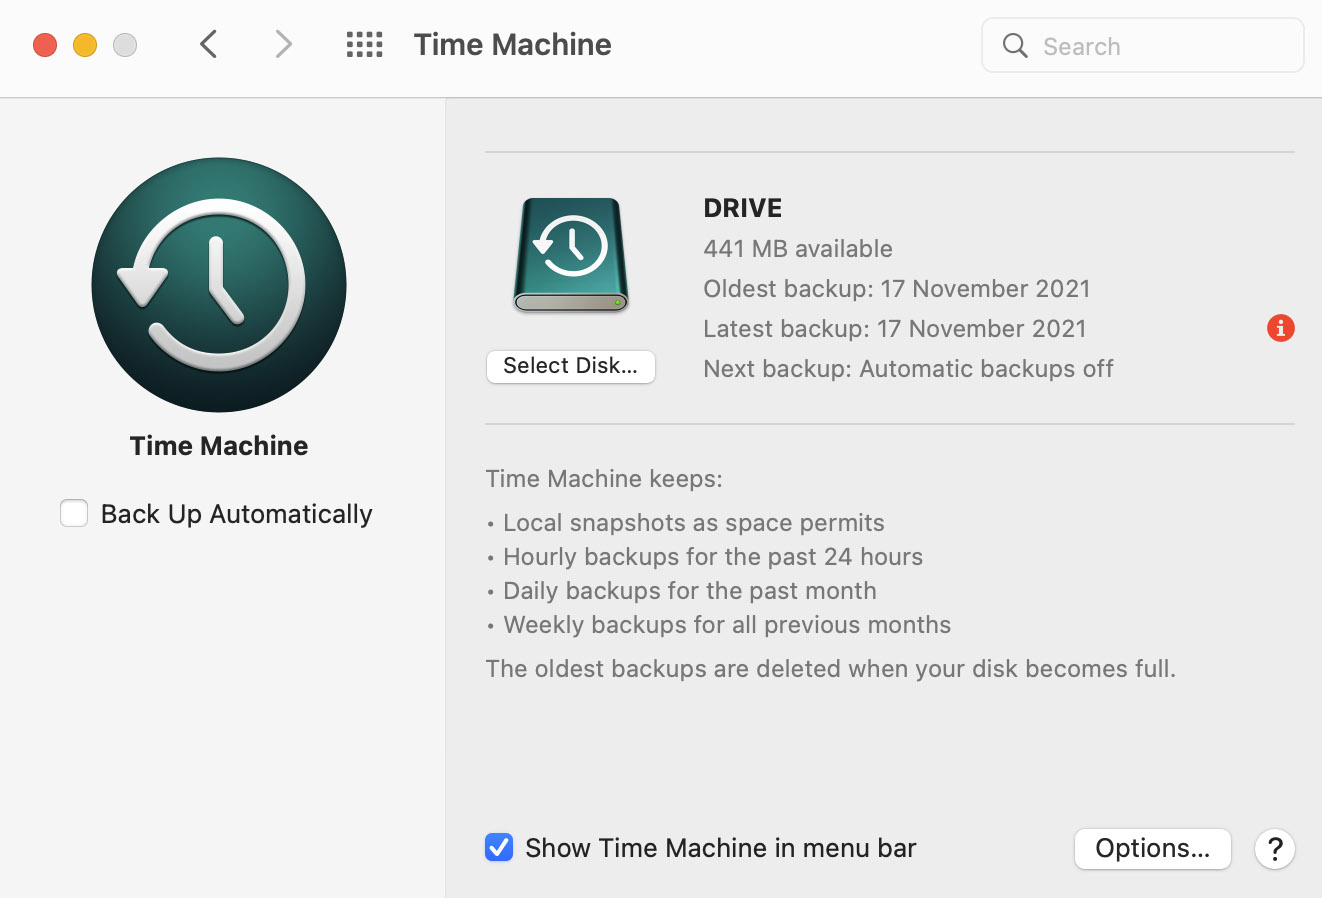 Set Up Time Machine to Automatically Back Up Your Data